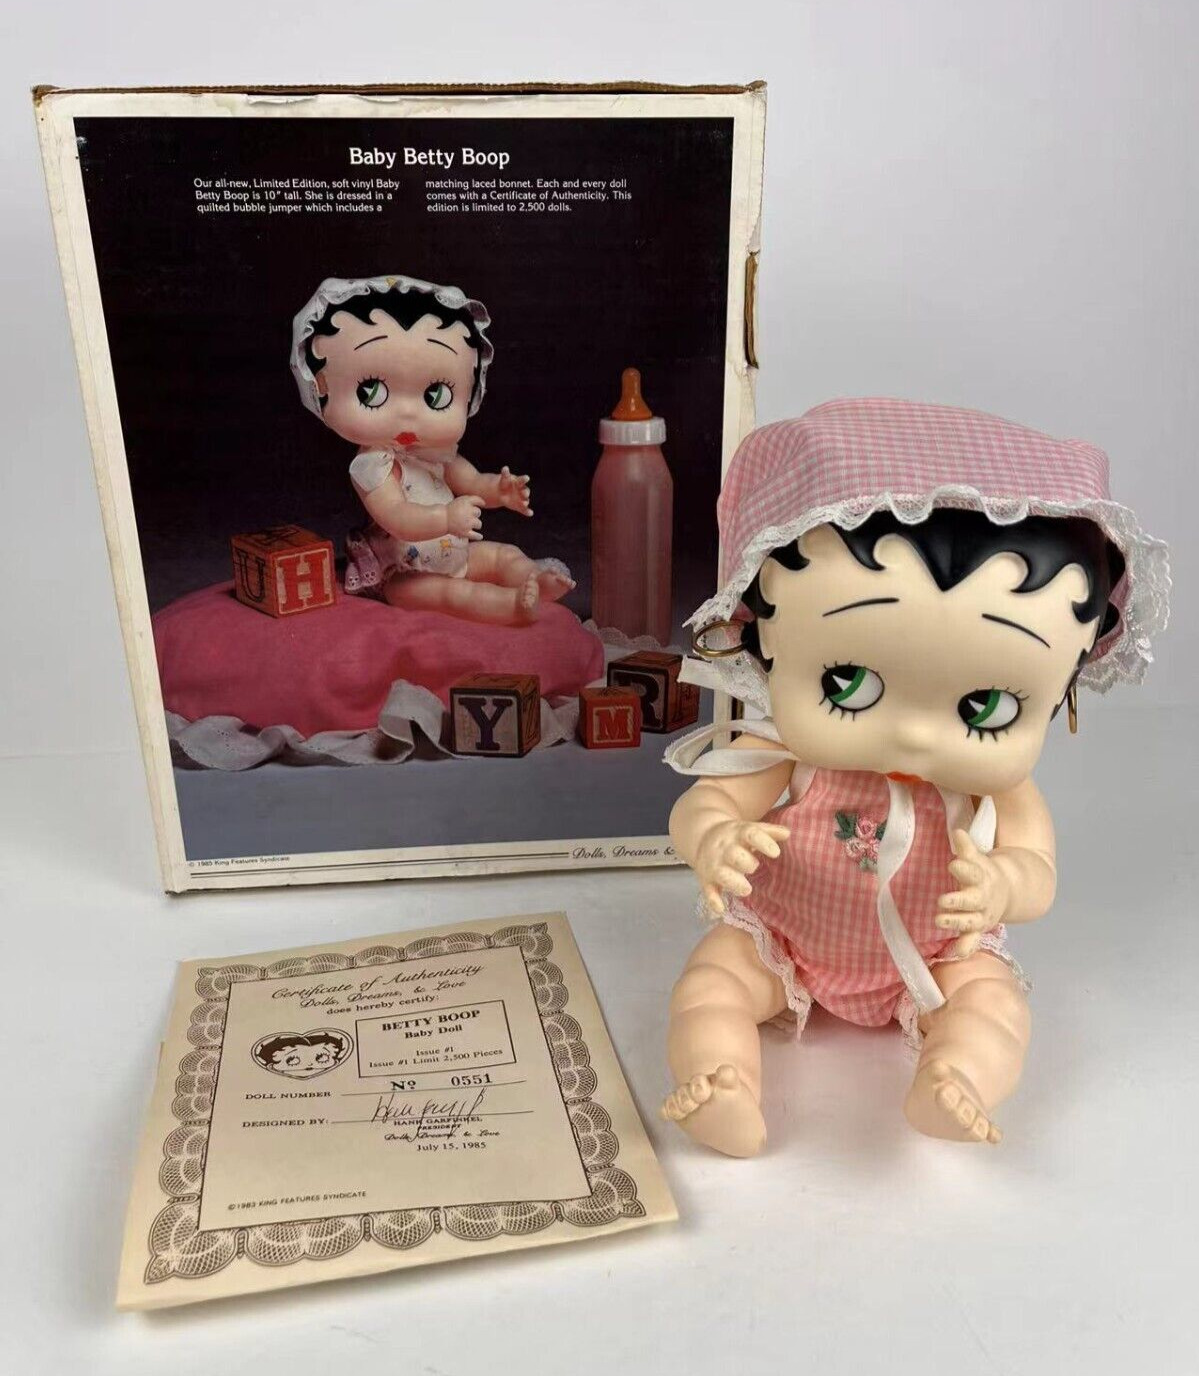 Rare 1985 Baby Betty Boop #0551 of 2,500 Limited Edition 1, Doll w/ COA & Box